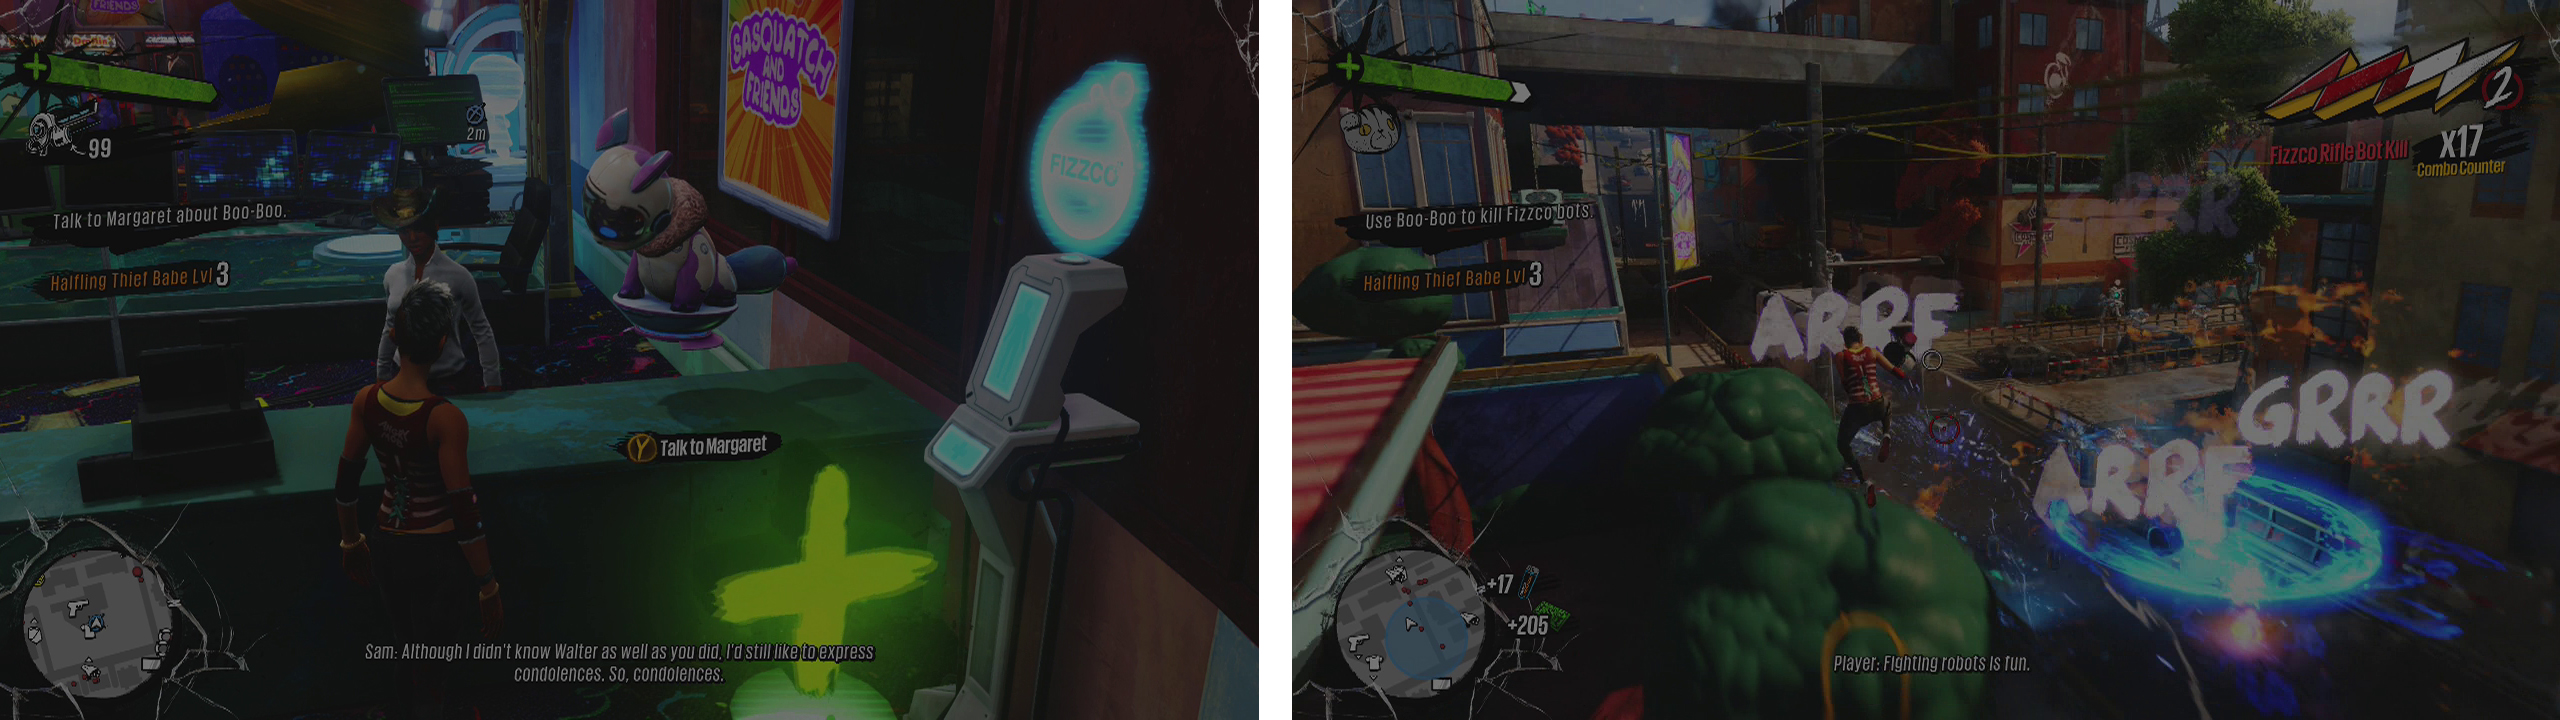 Speak with Margaret at the Oxford base (left) and use Boo-Boo to clear out the Fizzco Bots outside (right).